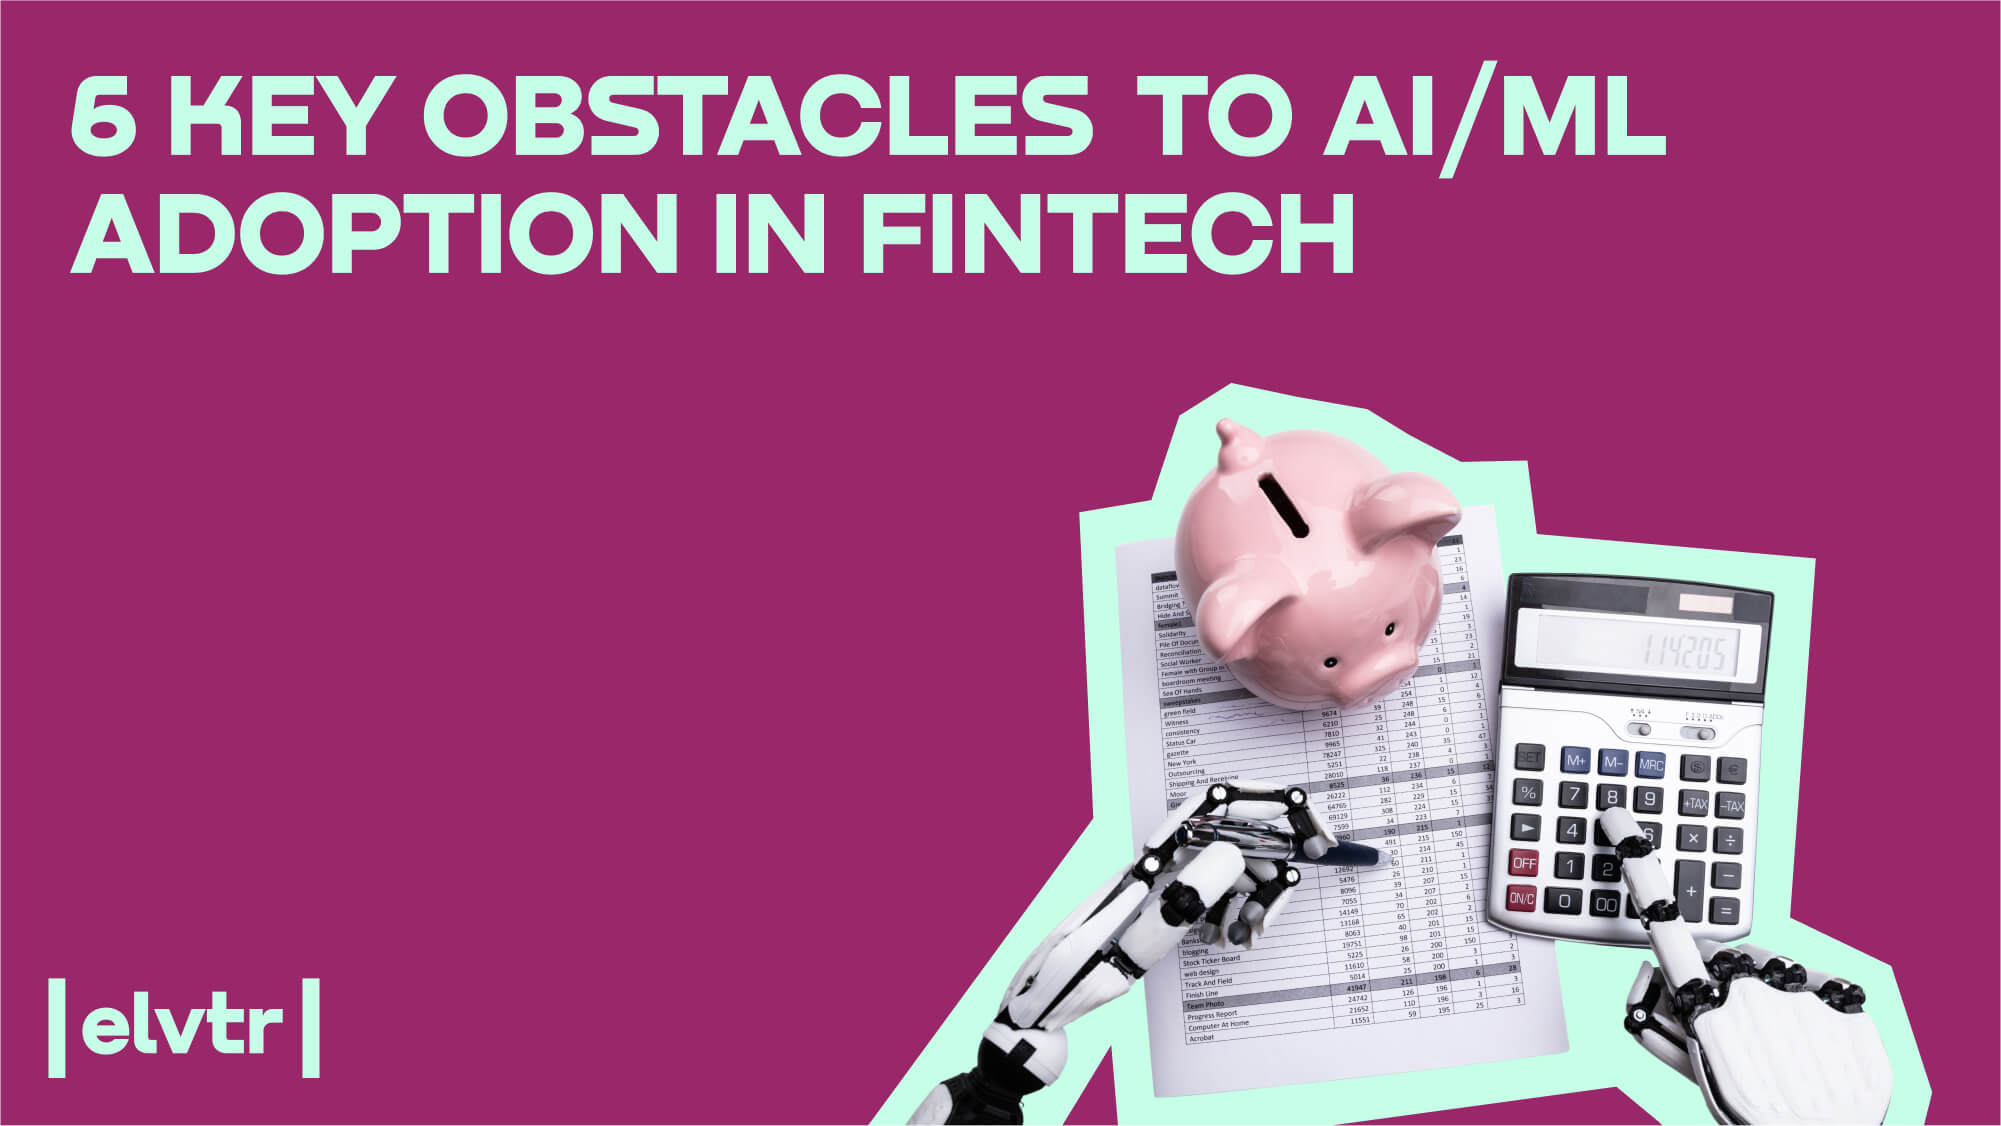 6 Key Obstacles to AI/ML Adoption in FinTech image